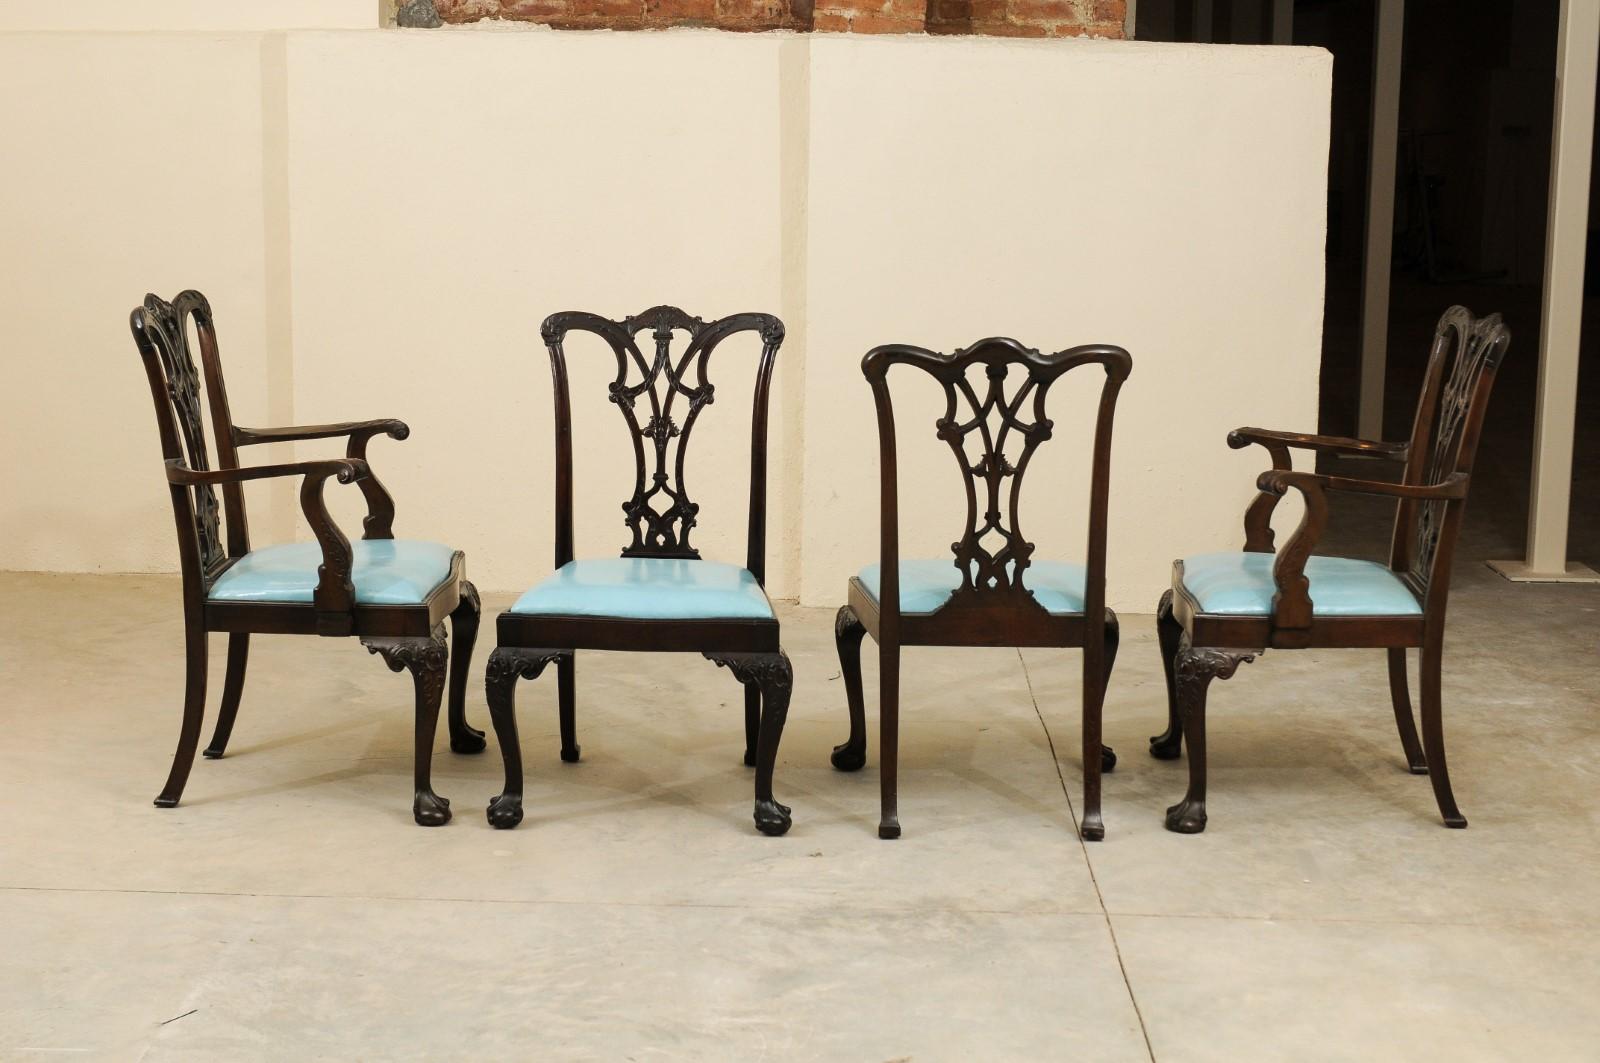 The Chippendale style mahogany dining chairs with 2 arm chairs and 10 side chairs featuring pierced black splats, removable light blue leather seats and carved cabriole legs with ball and claw feet. 

Arms dimensions are 41